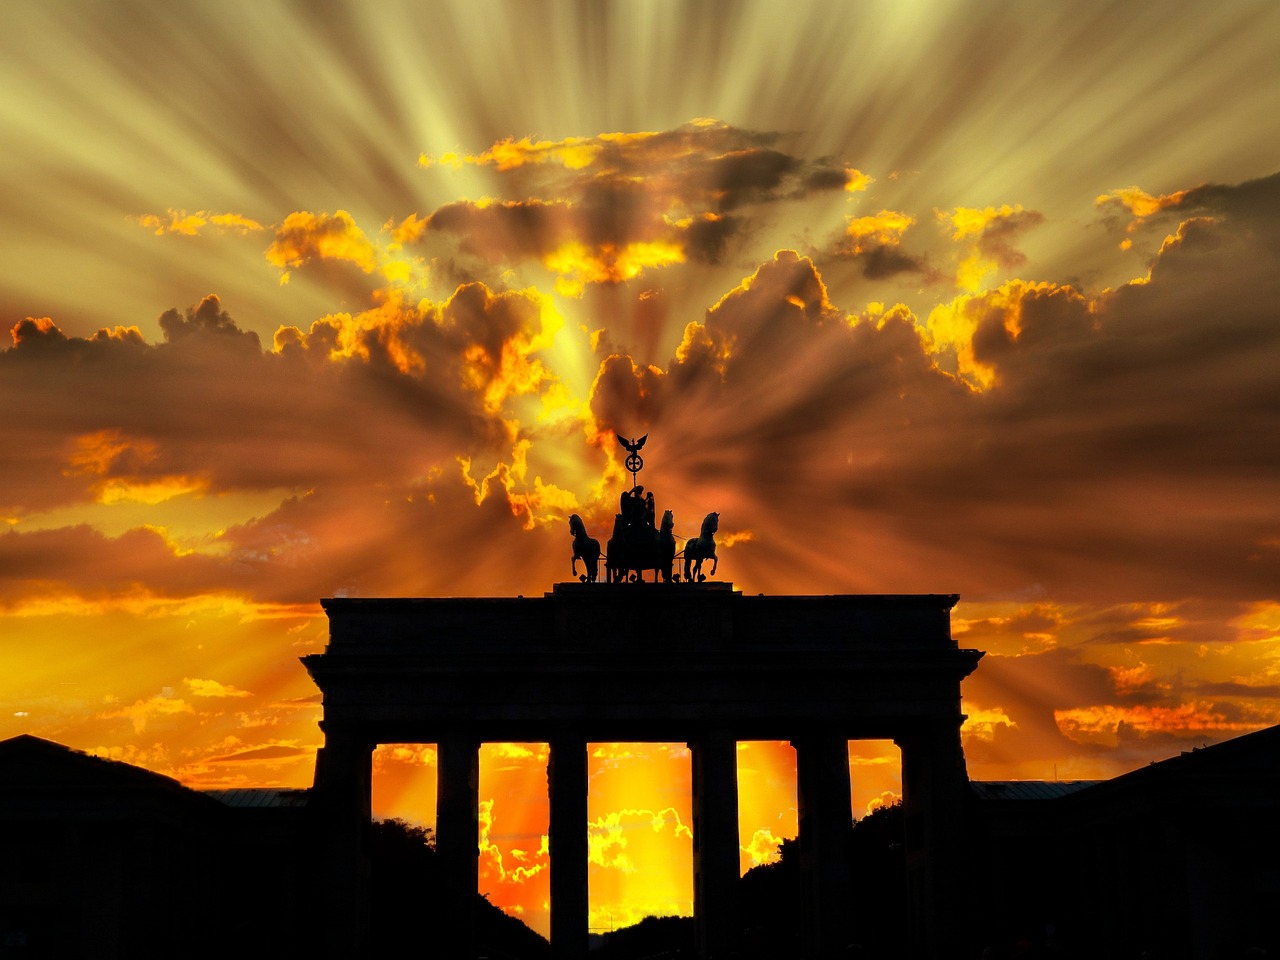 Culinary and Cultural Delights of Berlin in 5 Days